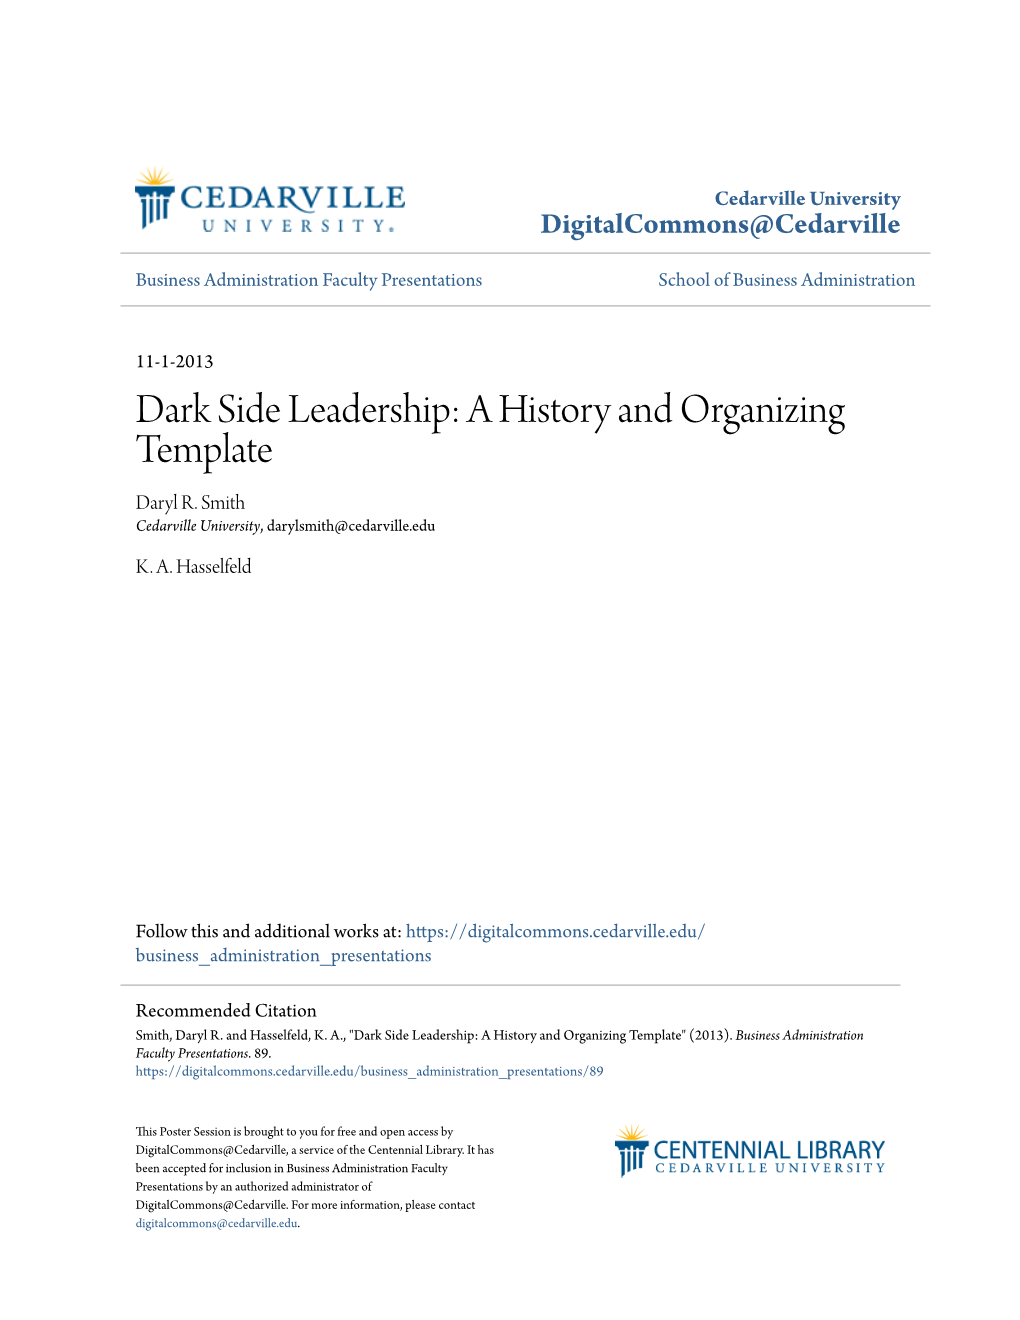 Dark Side Leadership: a History and Organizing Template Daryl R